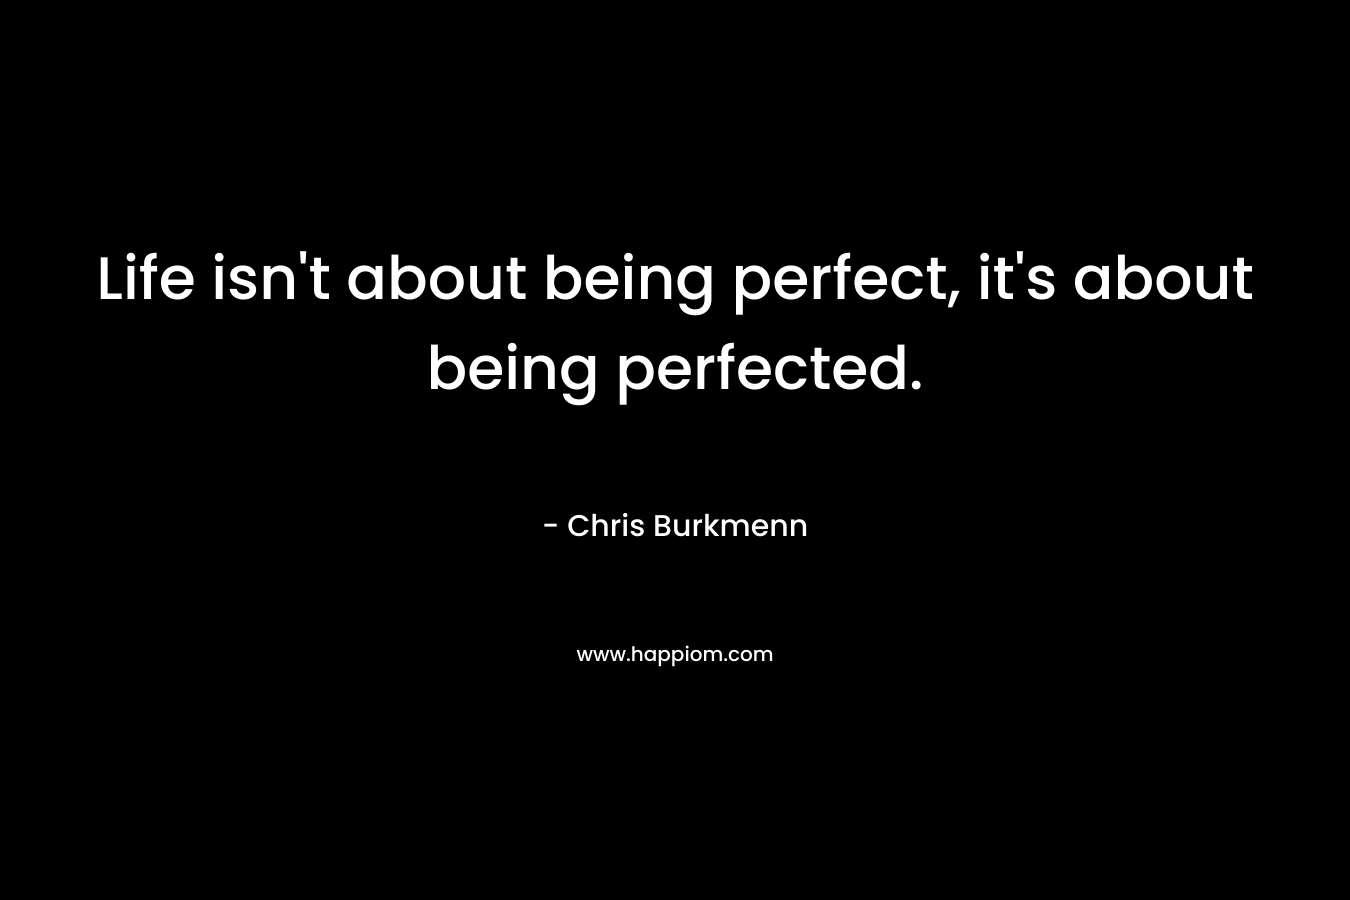 Life isn’t about being perfect, it’s about being perfected. – Chris Burkmenn